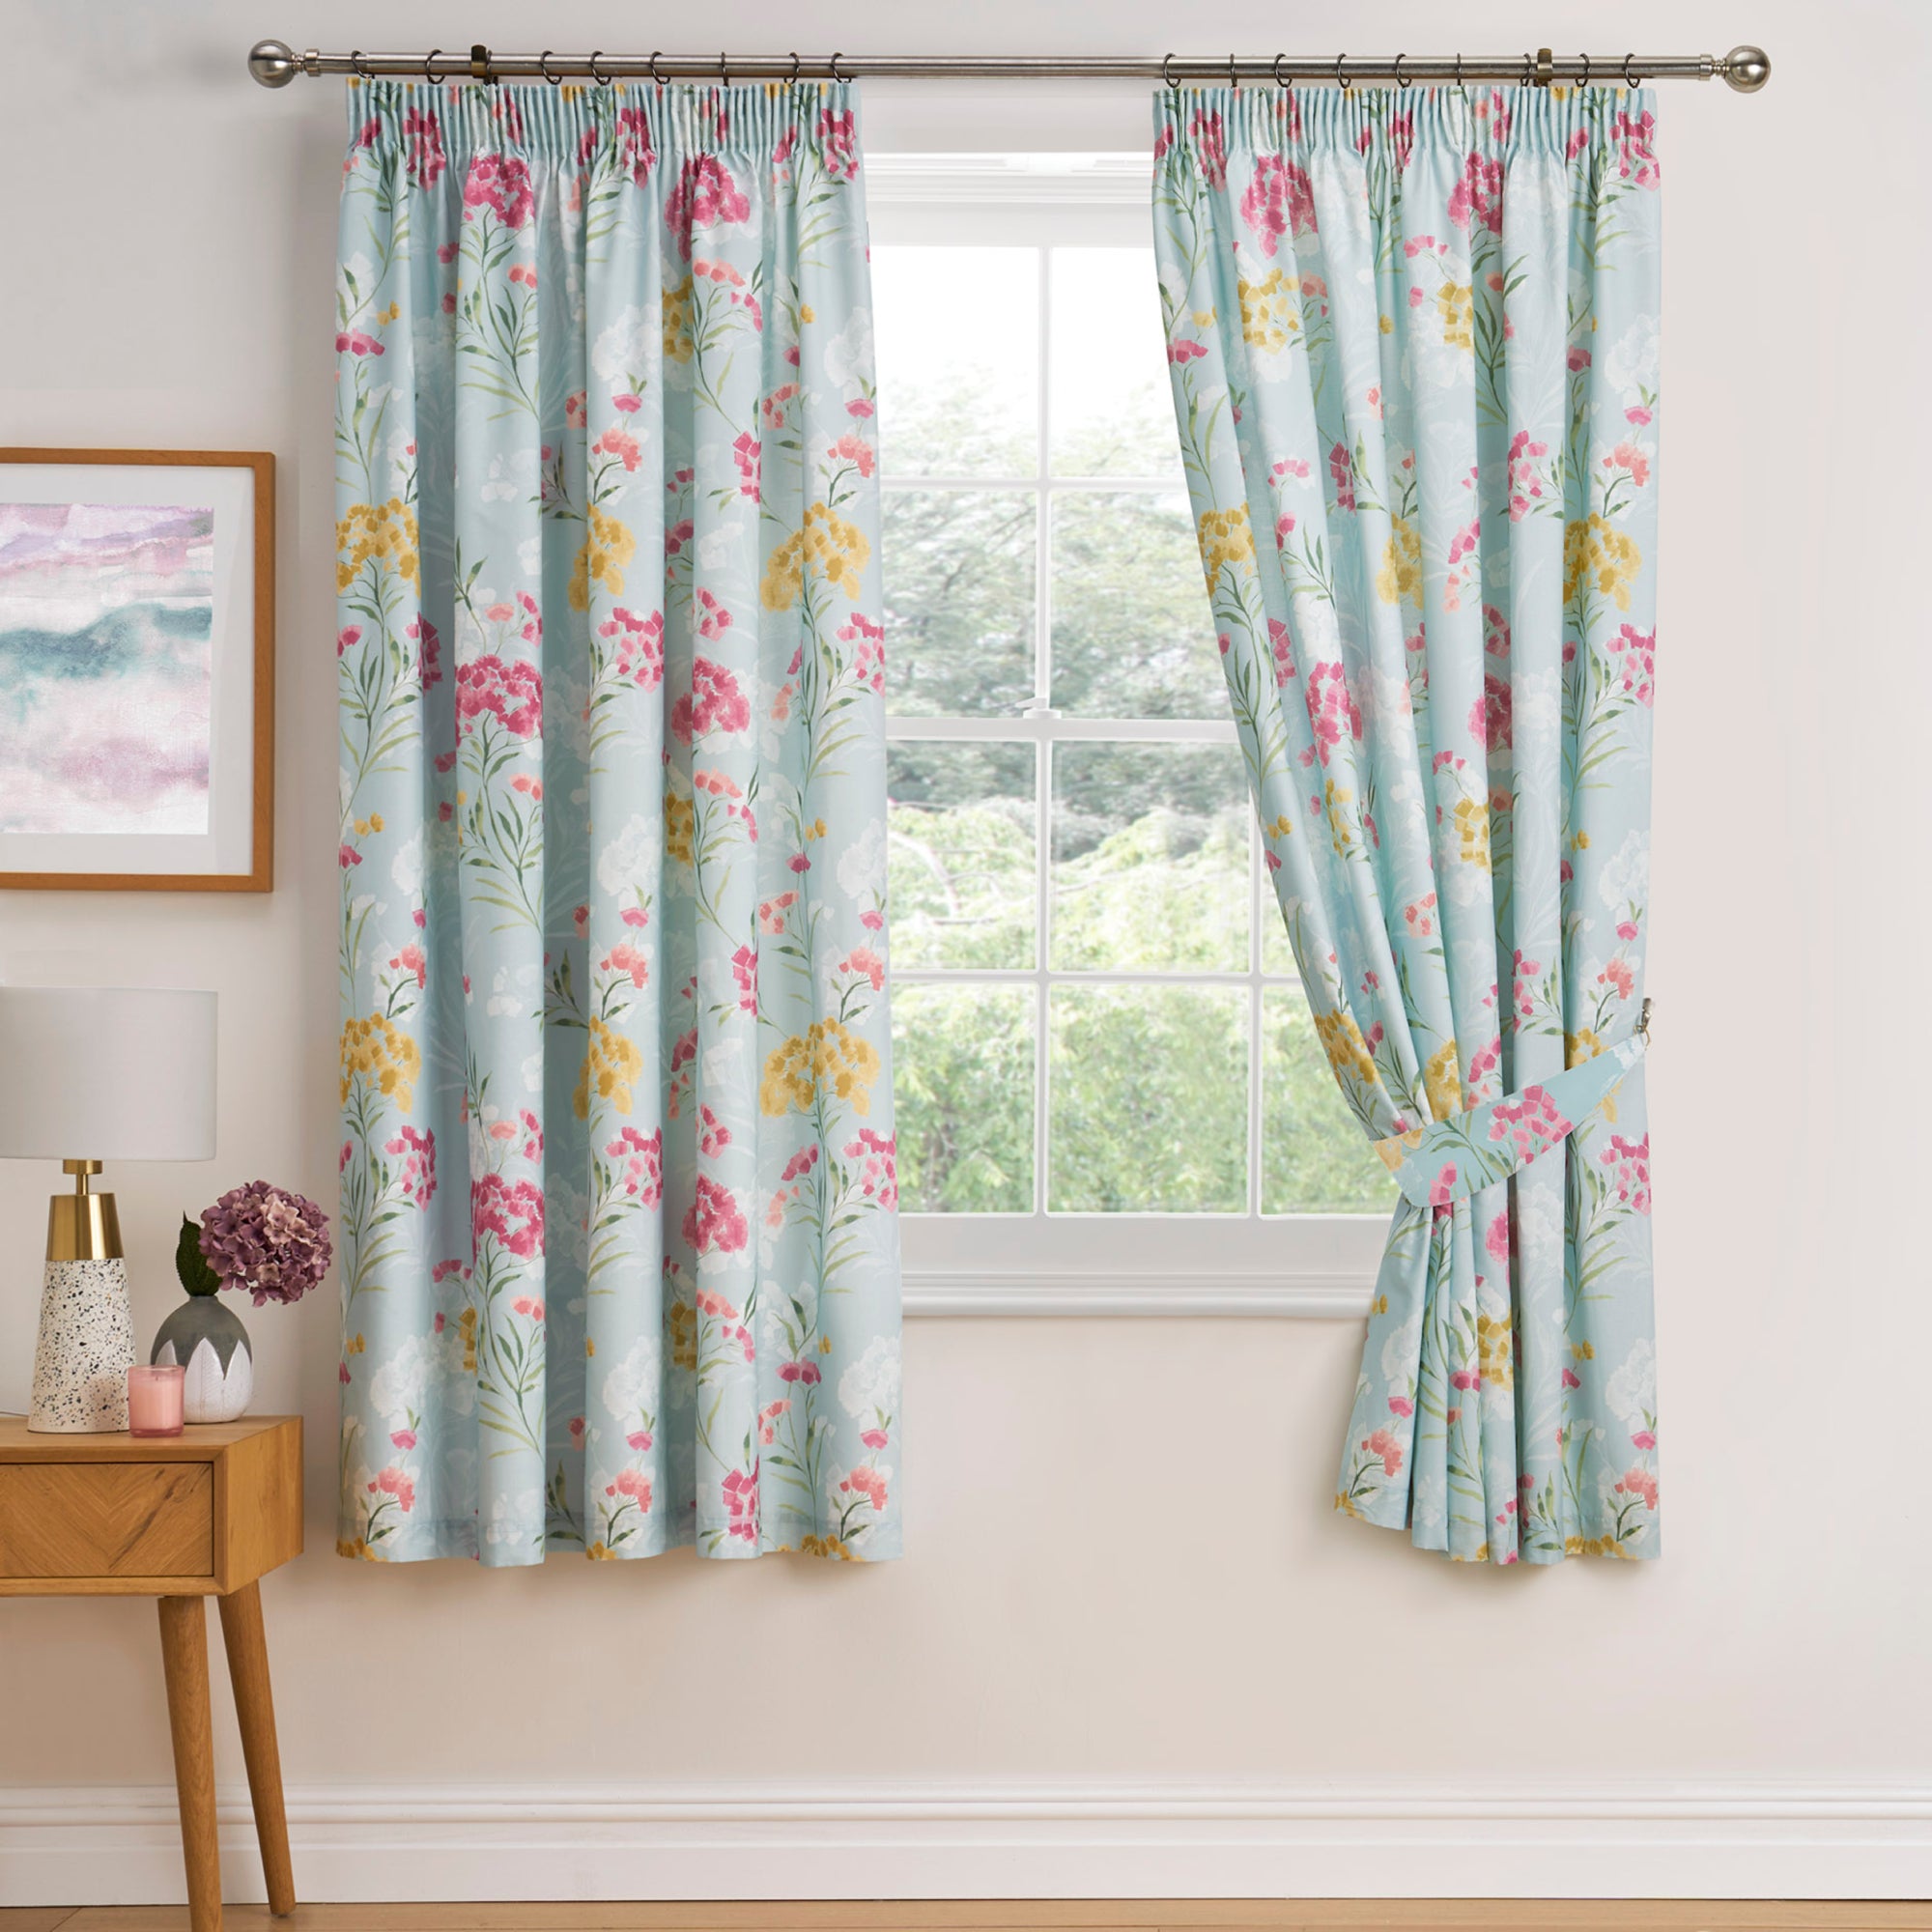 Pair of Pencil Pleat Curtains With Tie-Backs Pia by Dreams & Drapes Design in Multi